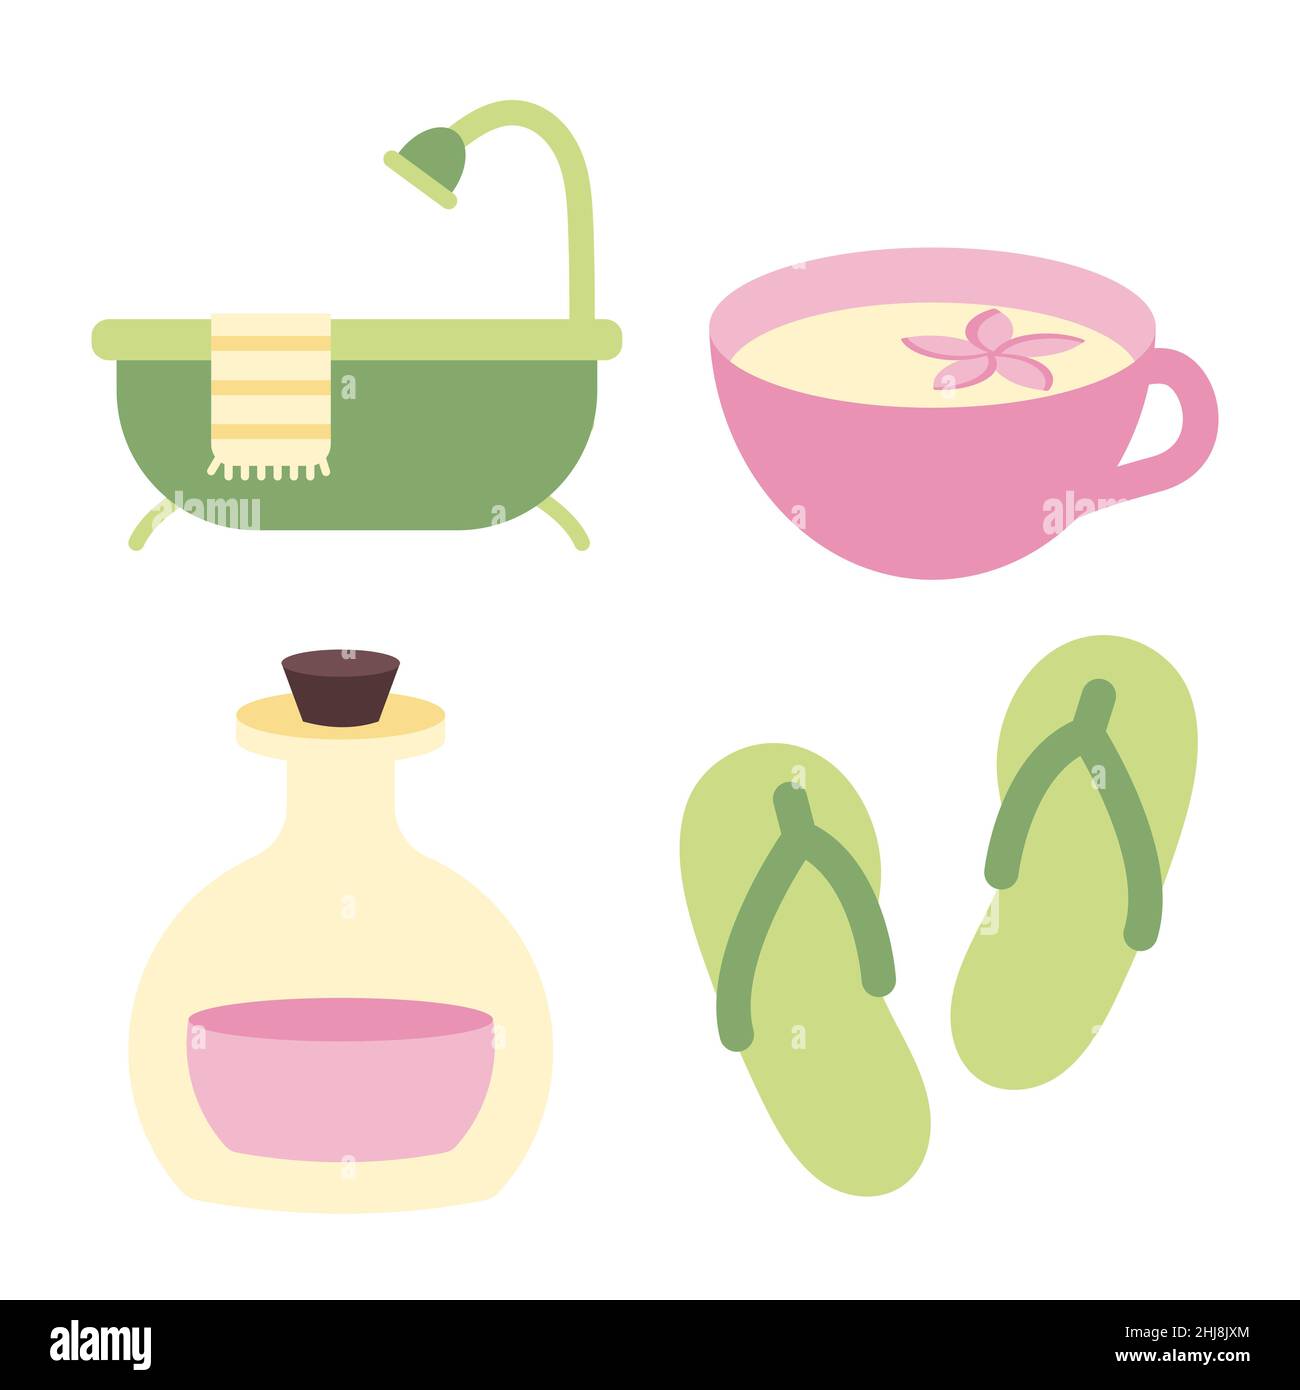 Set of elements for spa and relaxation. Herbal tea, flip flops, bottle with essential oil and bath hub. Accessories for relax, meditation and personal Stock Vector